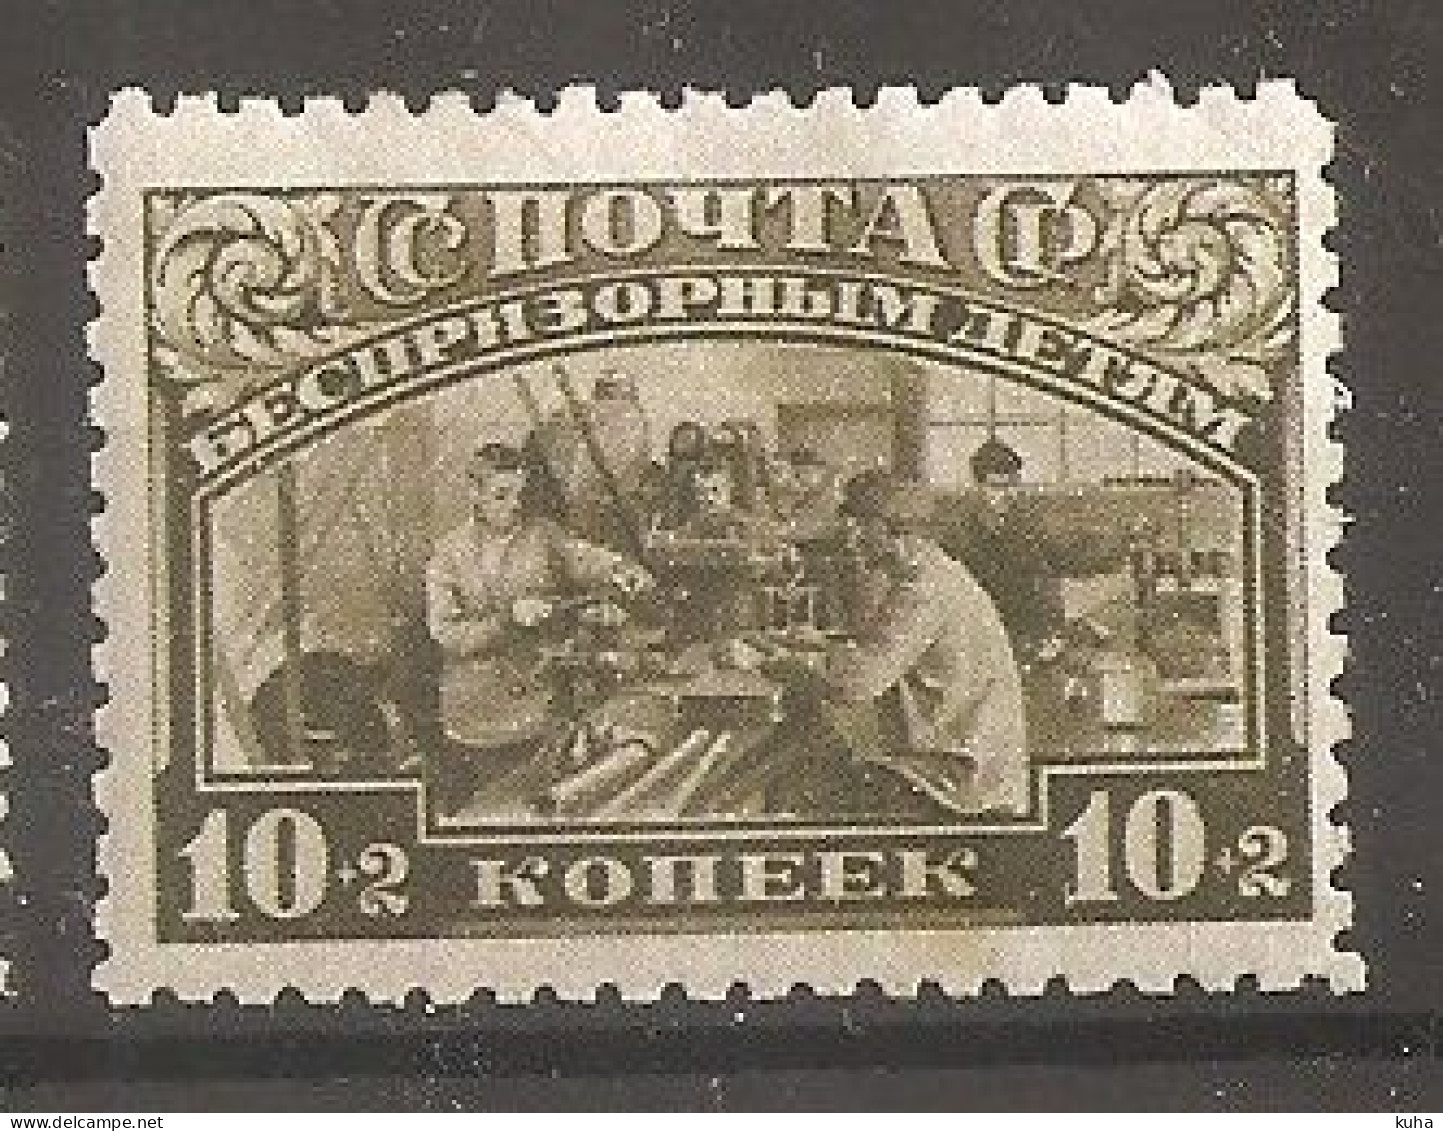 Russia Russie Russland USSR 1929 MH - Unused Stamps